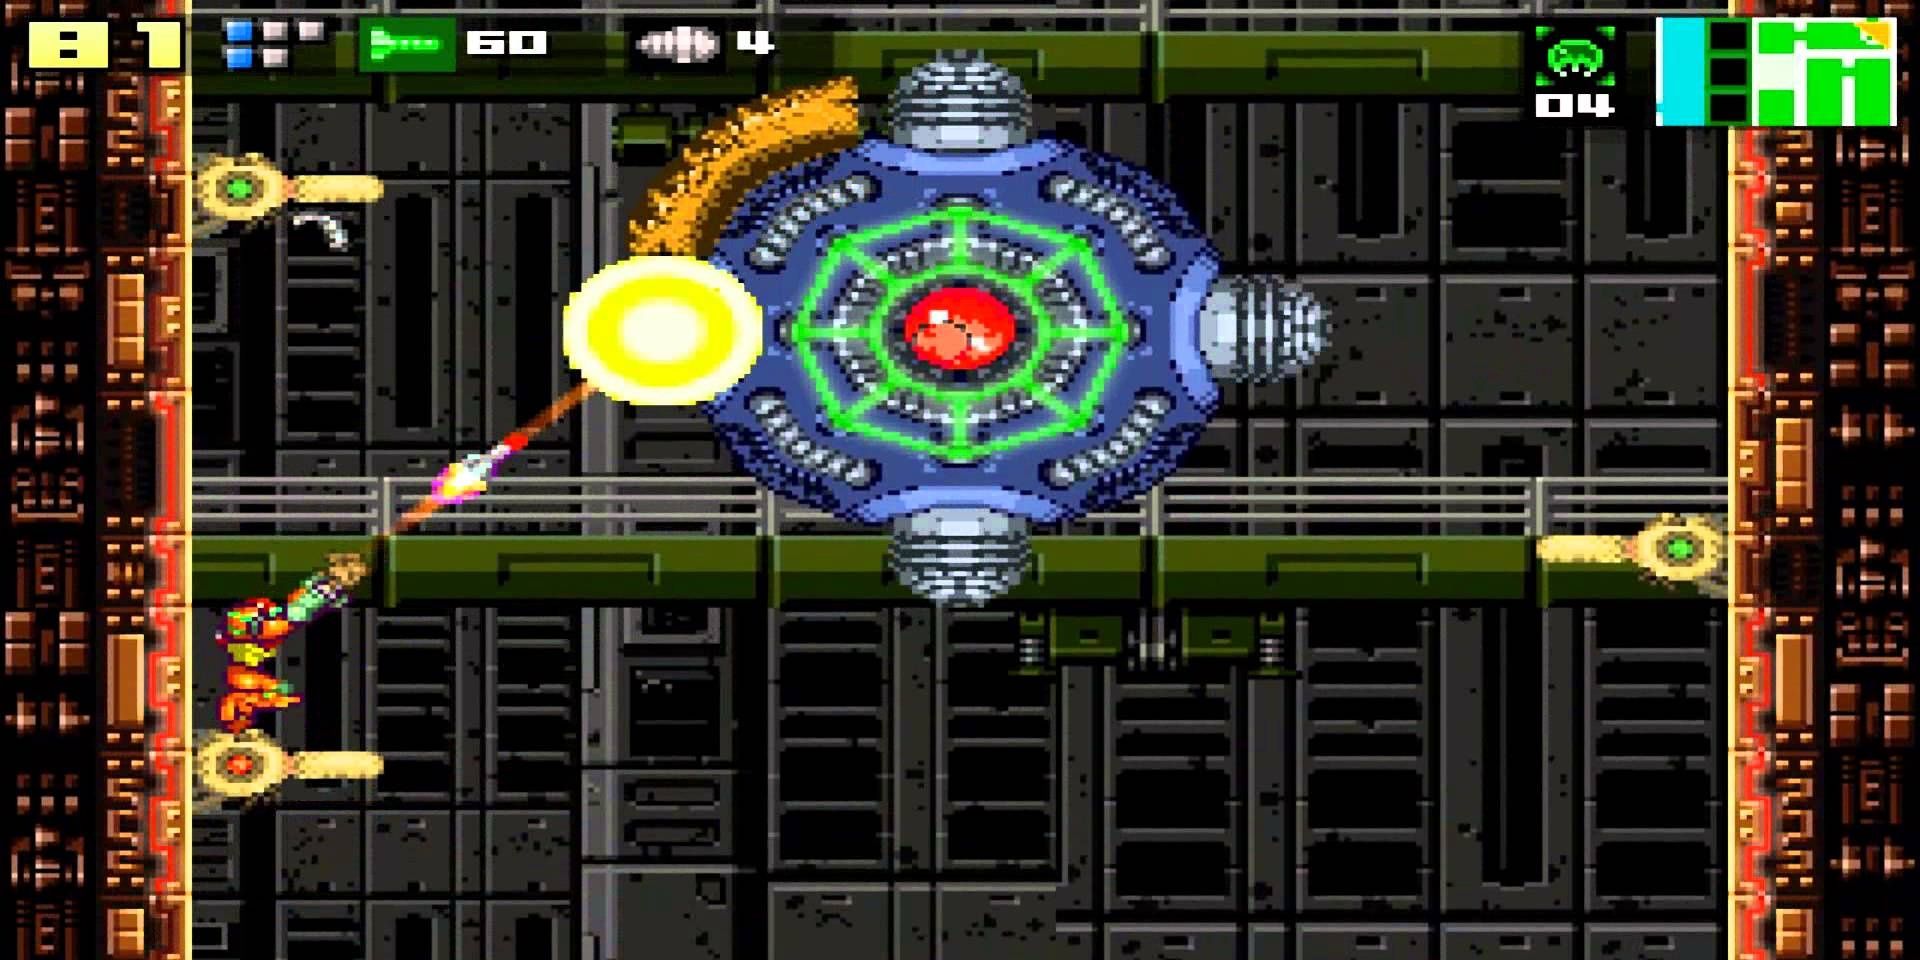 AM2R gameplay showing samus firing missiles at a boss whilst crouching